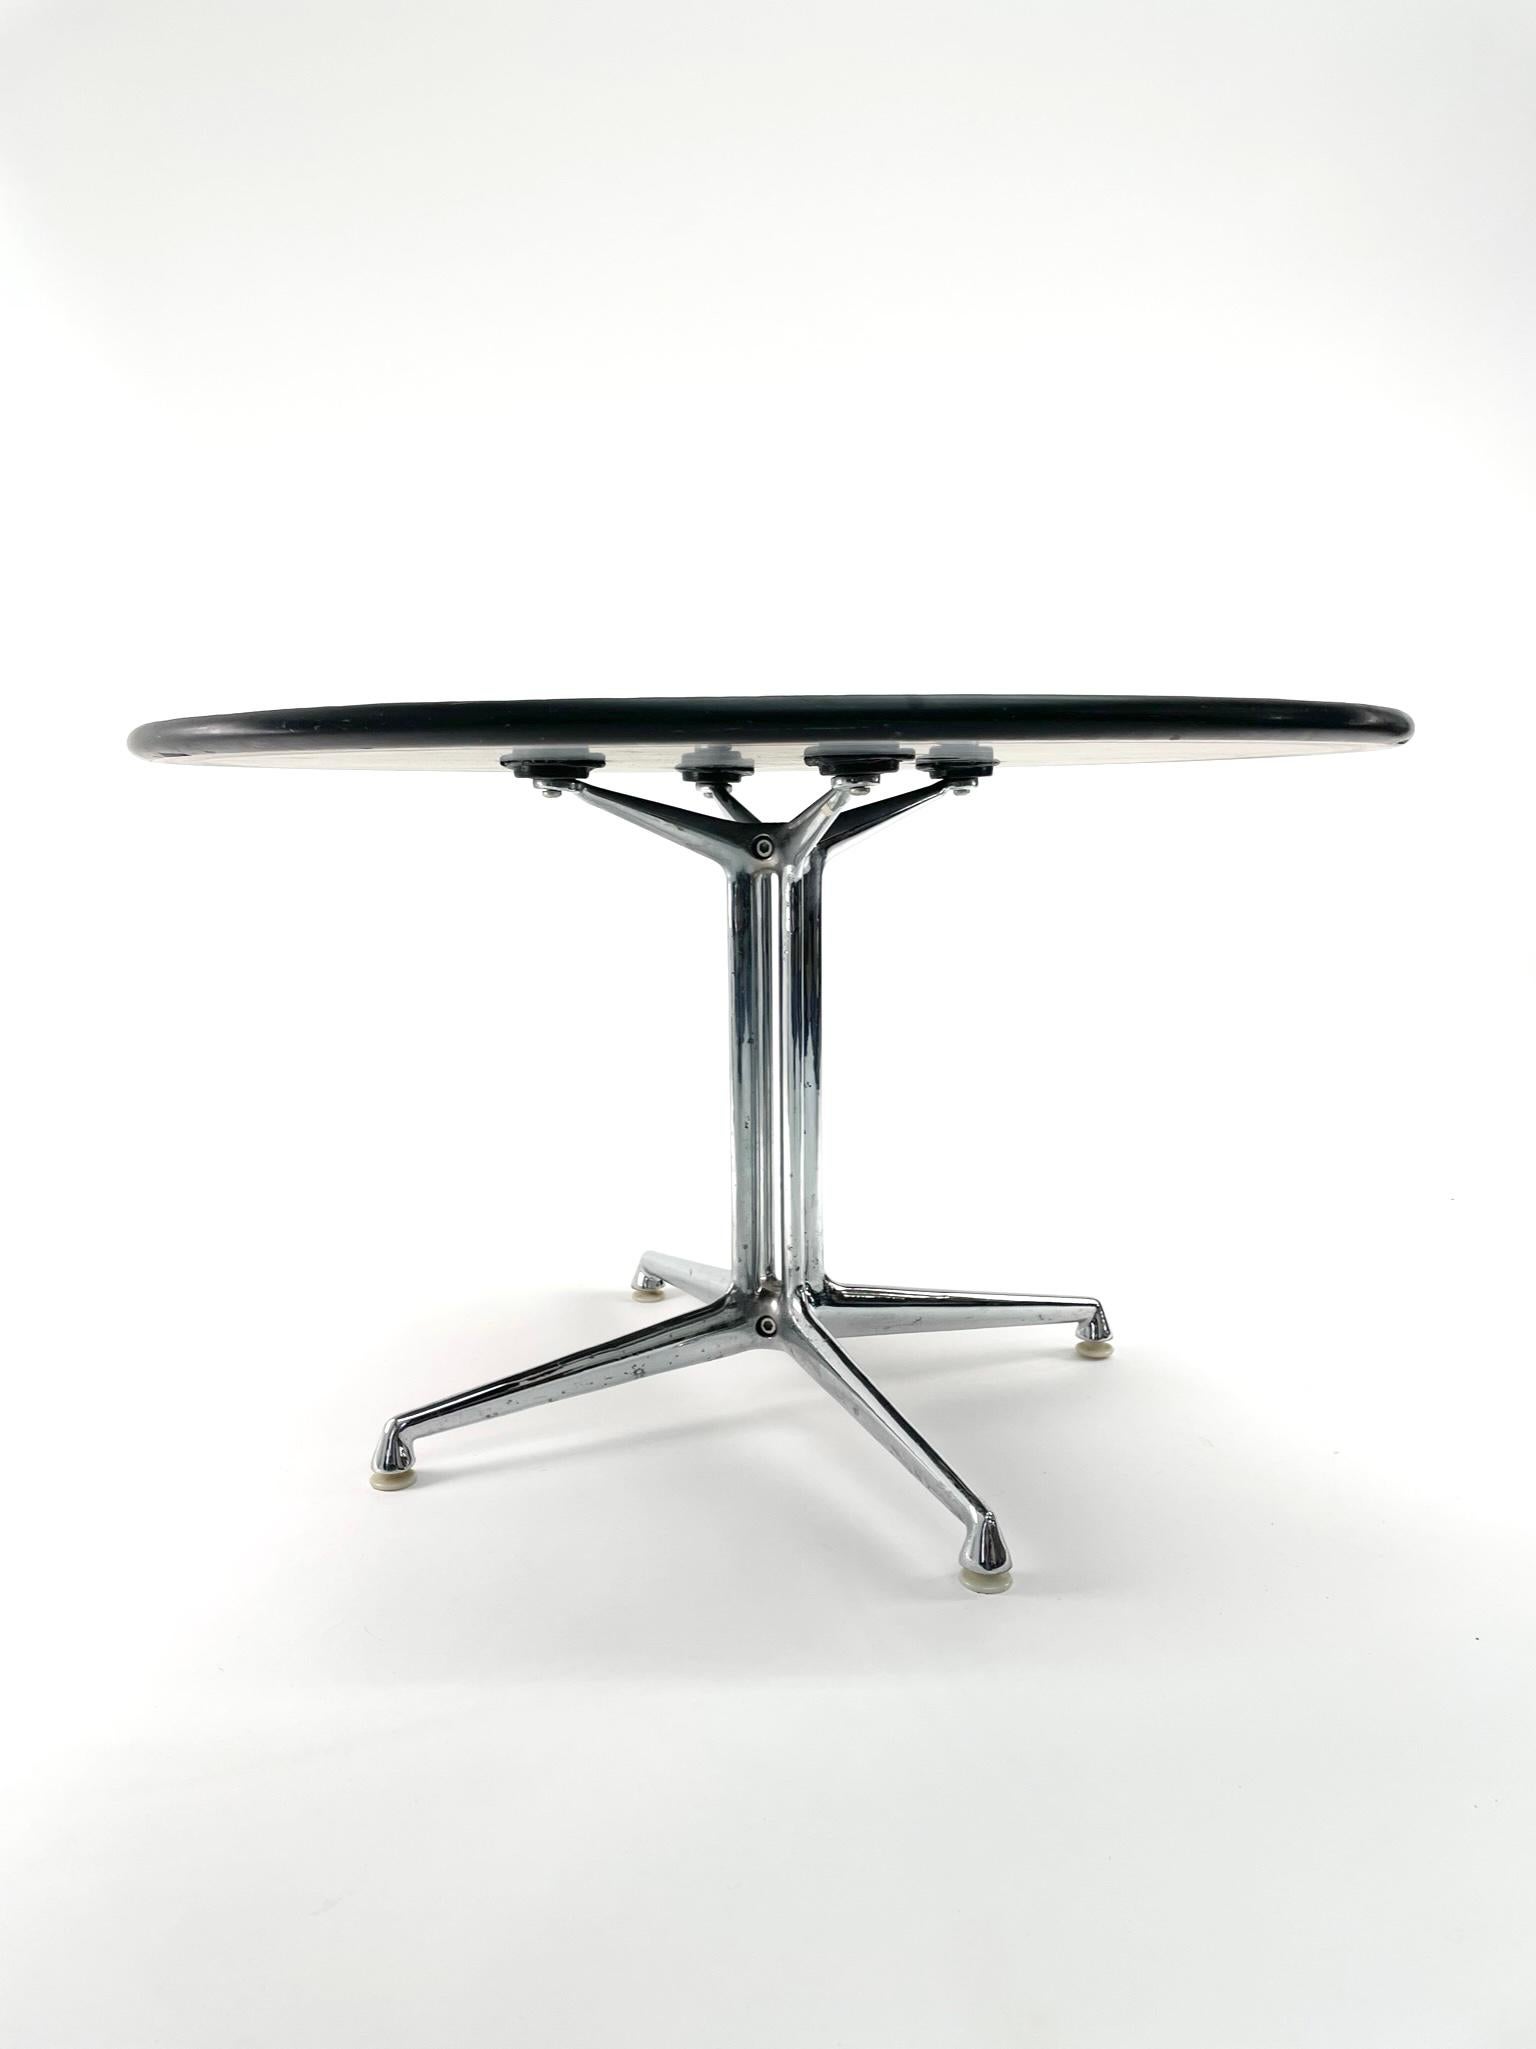 La Fonda coffee or large end table designed by Charles and Ray Eames and manufactured by Herman Miller. This series was designed for the La Fonda restaurant, designed by Alexander Girard in 1962. This series has remained an iconic Eames work.

This